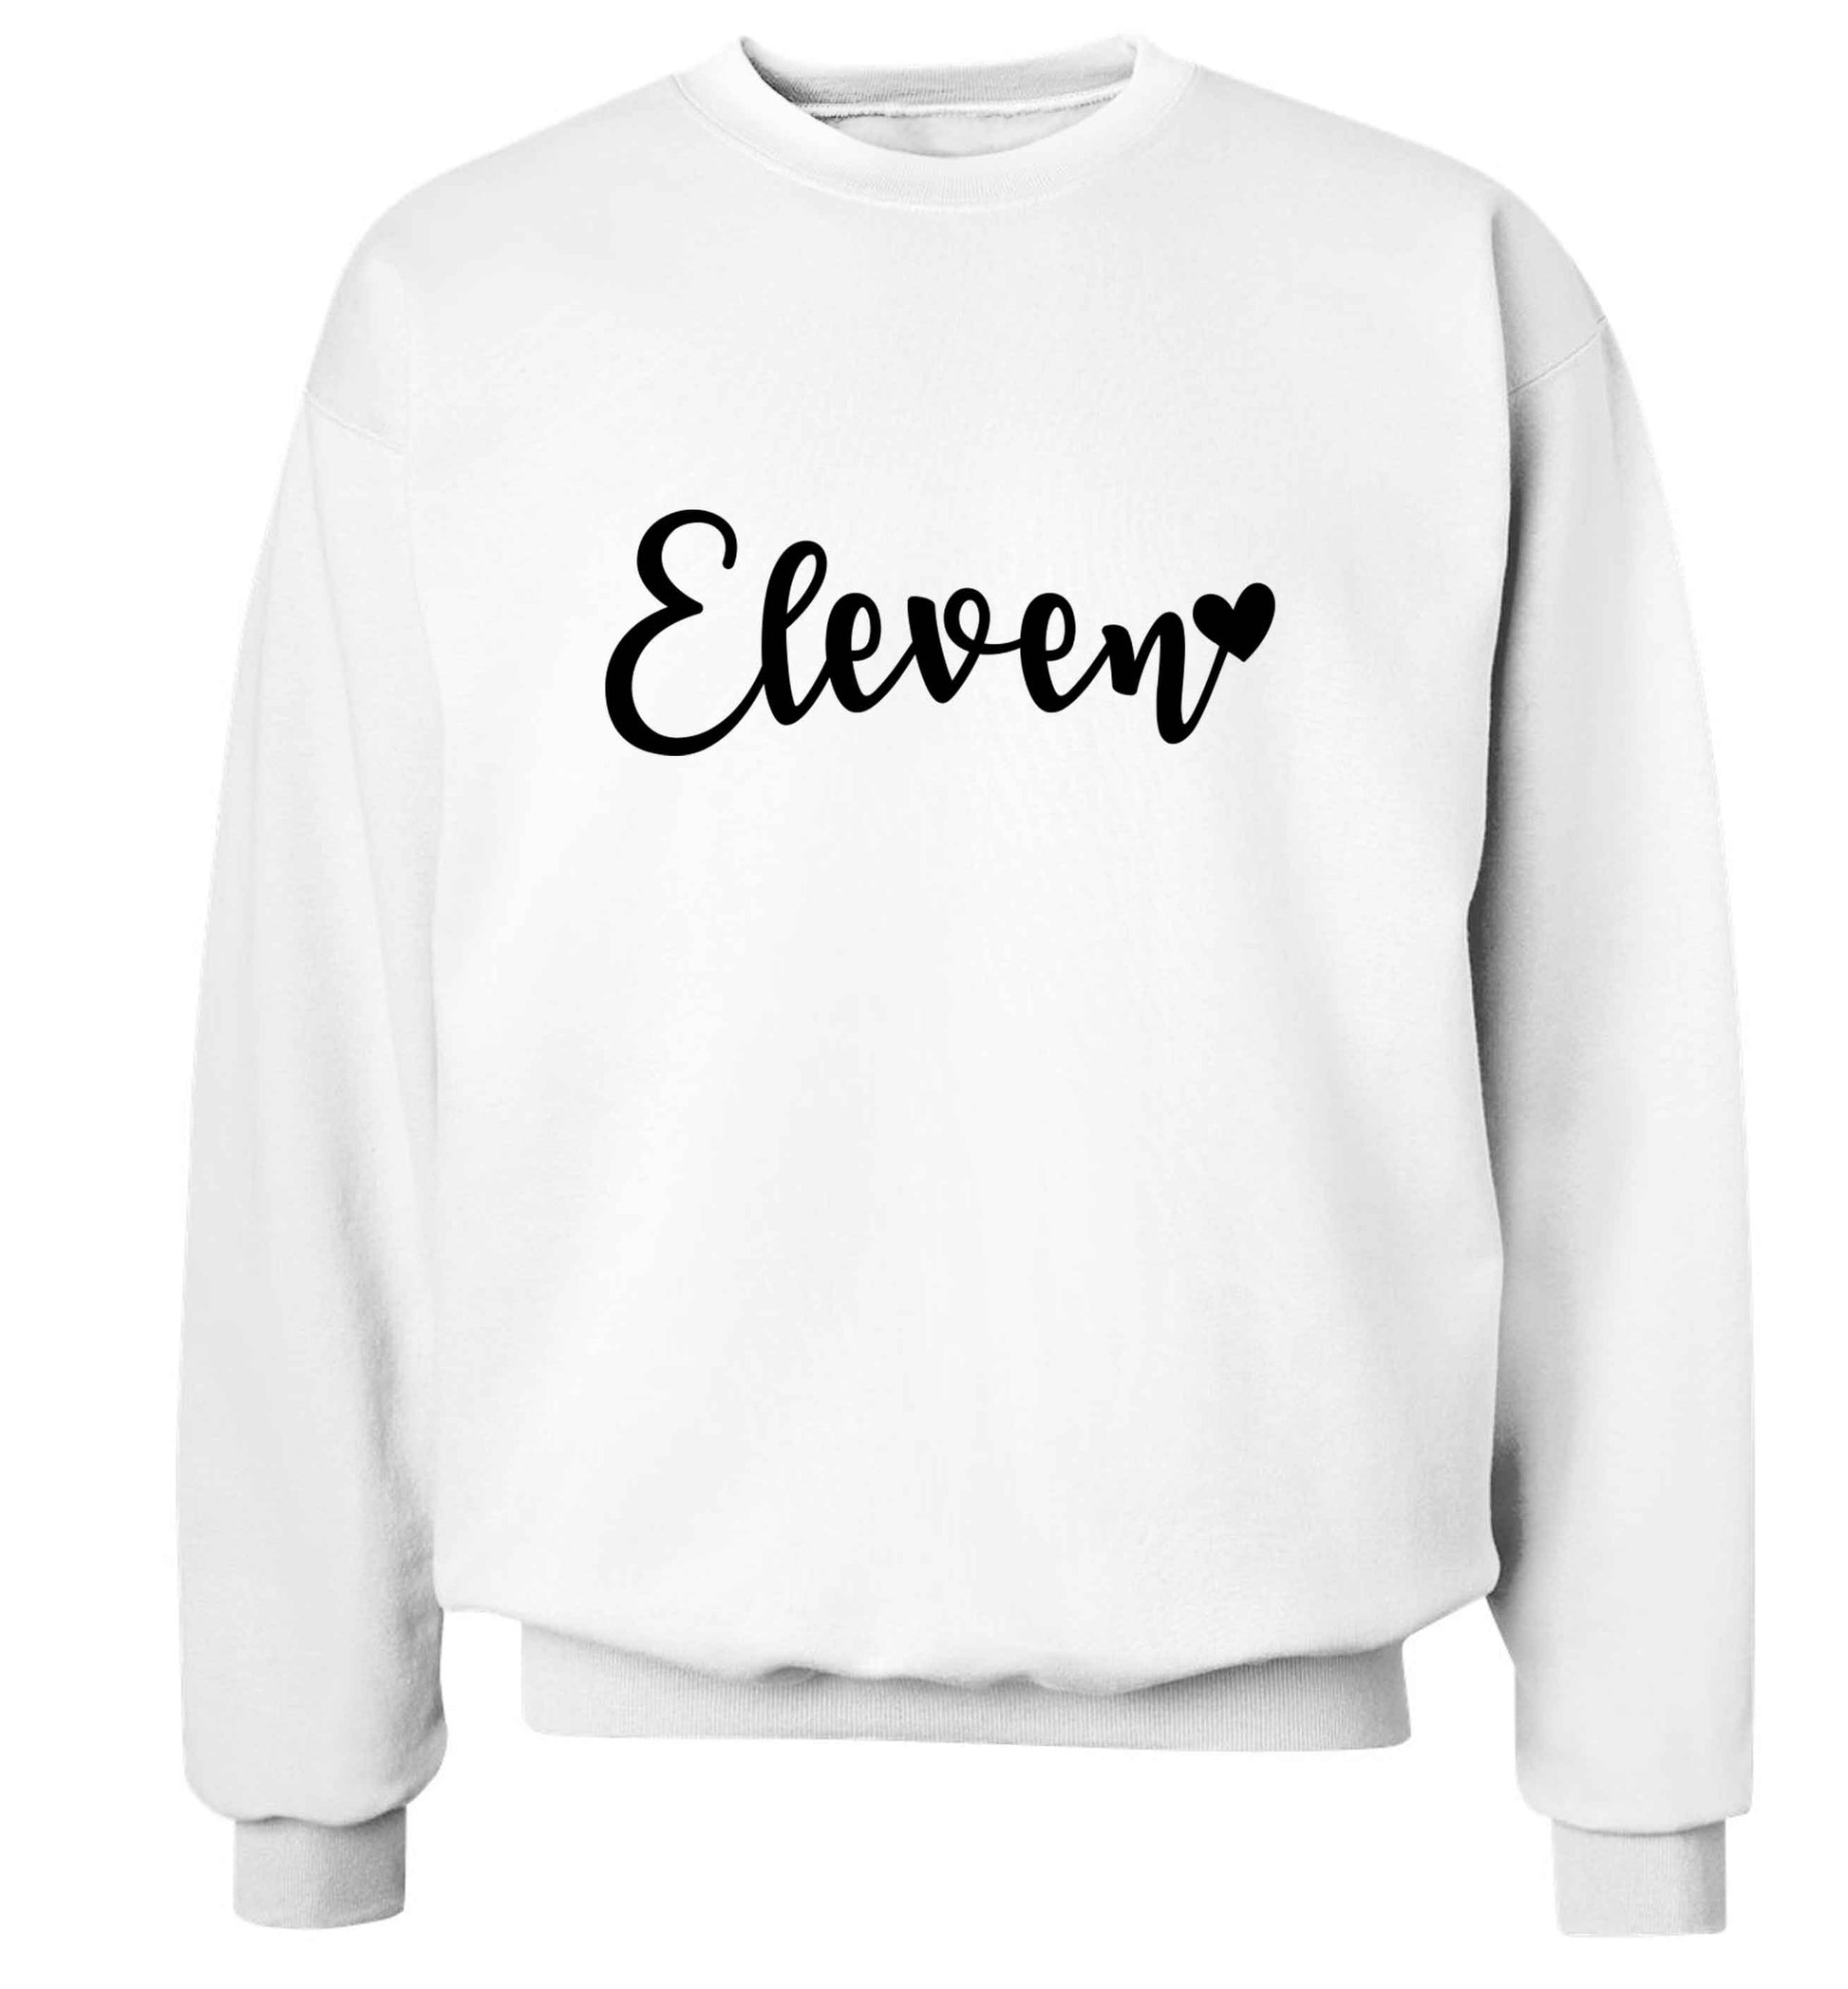 Eleven and heart! adult's unisex white sweater 2XL